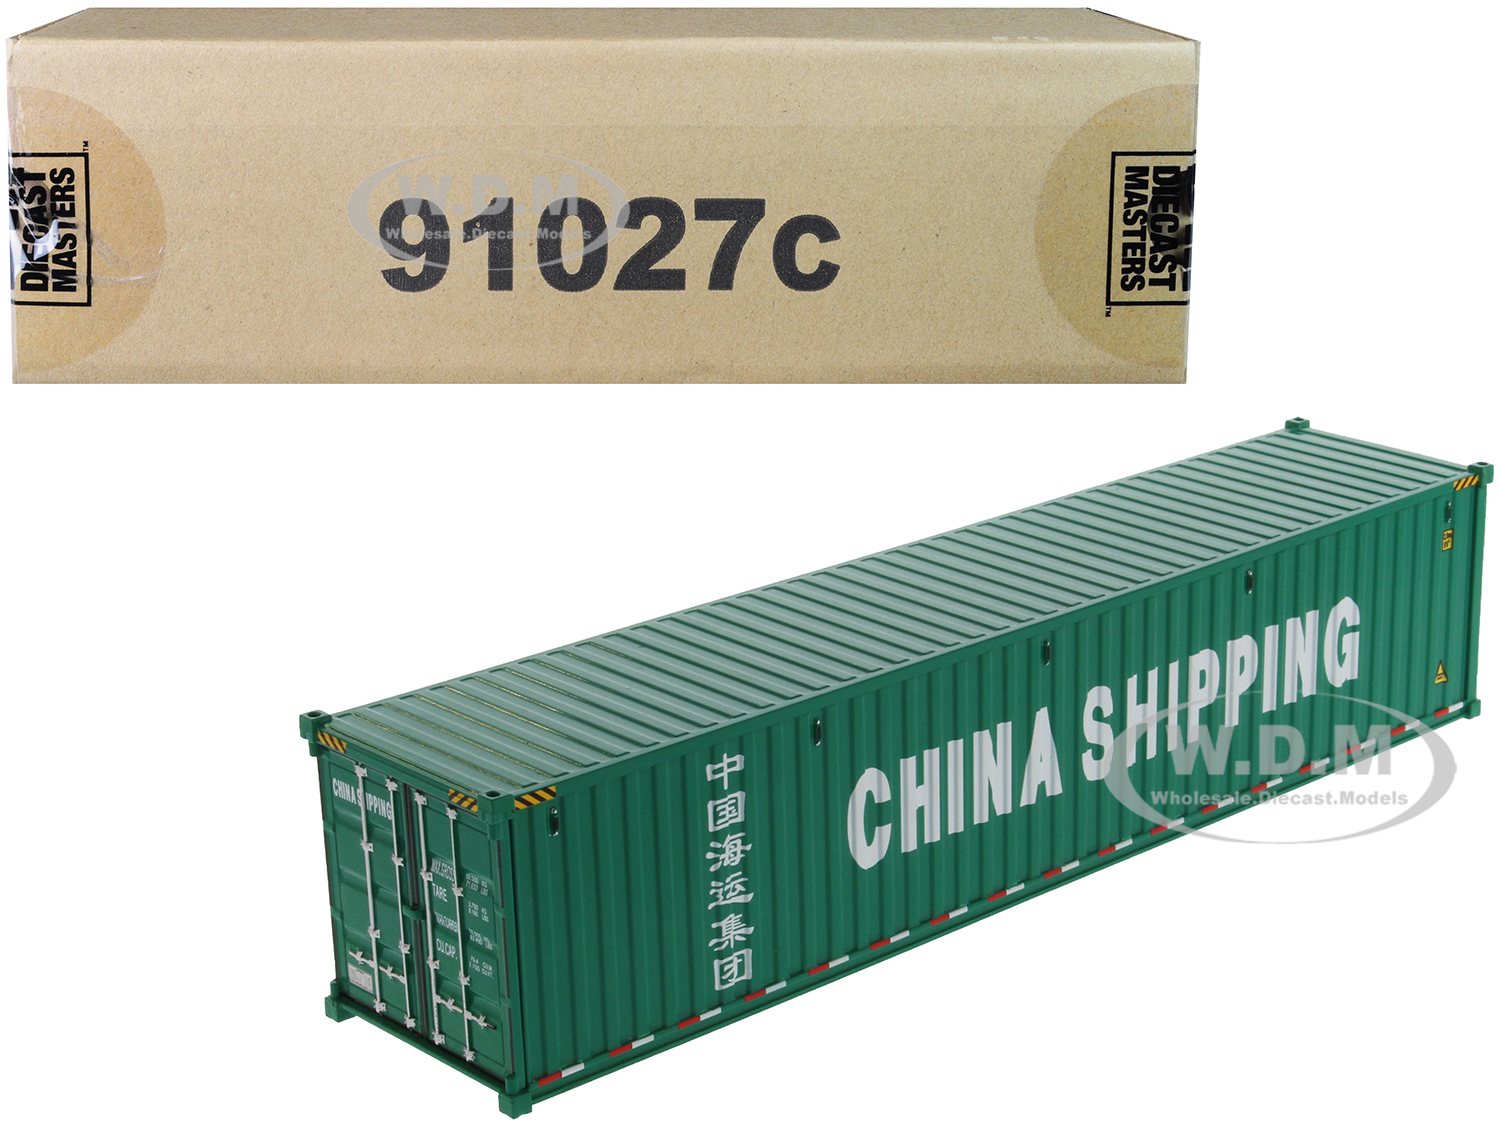 40 Dry Goods Sea Container "China Shipping" Green "Transport Series" 1/50 Model by Diecast Masters